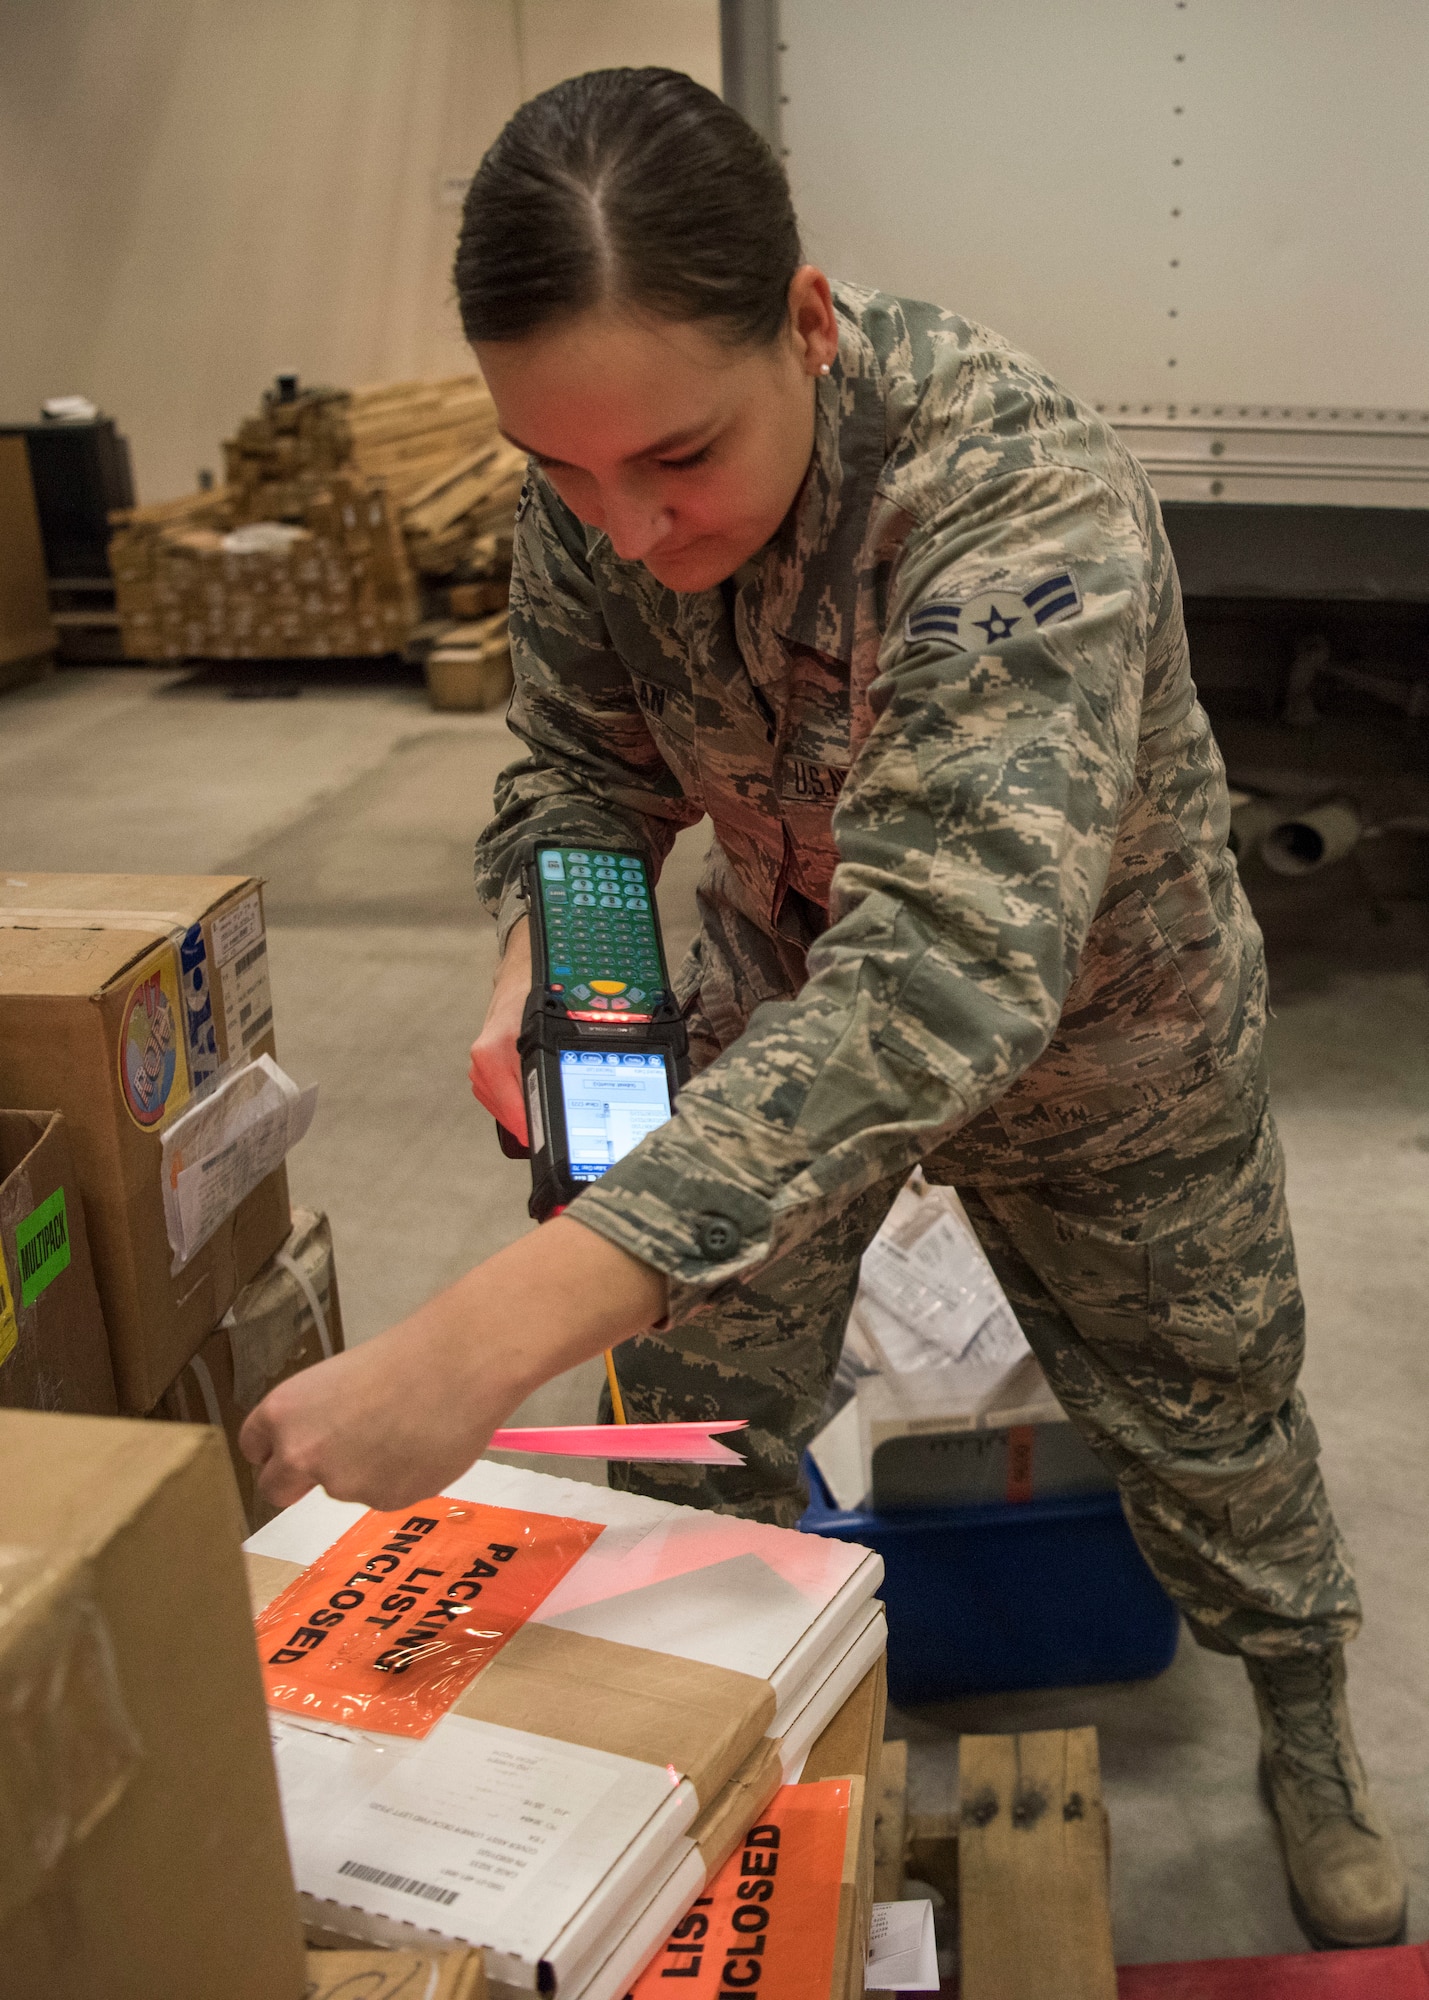 Alaska Air National Guard Airman 1st Class Lauren Scanlan, 176th Logistics Readiness Squadron ground transportation, scans a shipment order for delivery, March 11, 2019, at Joint Base Elmendorf-Richardson, Alaska. In one of the newest total force integration associations of its kind, the 673d Logistics Readiness Squadron Materiel Management flight is conducting a complete C-17 aircraft supply turnover to the Alaska ANG 176th LRS.